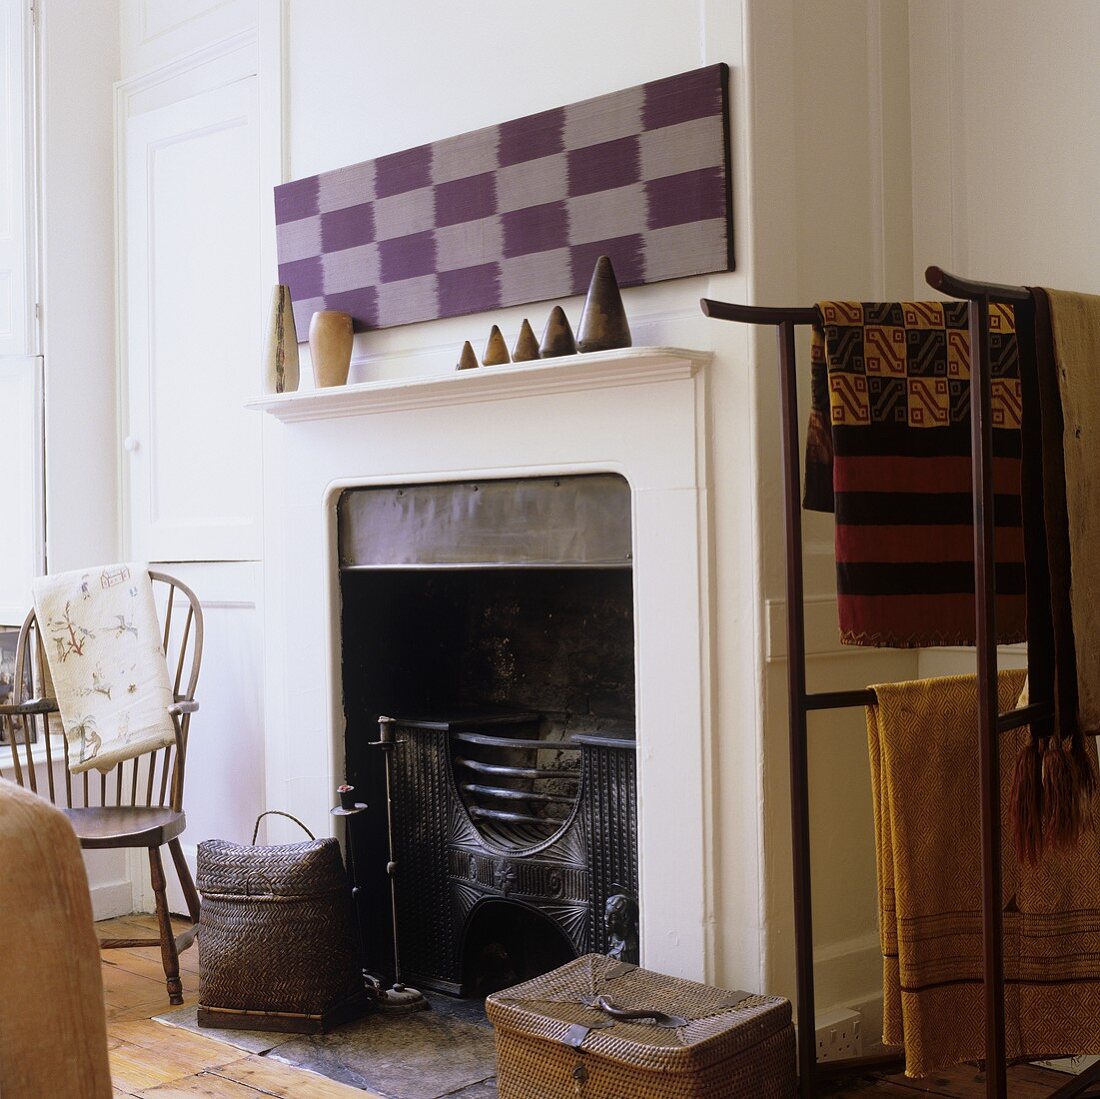 A white fireplace with cladding and a metal stand hung with ethnic cloths